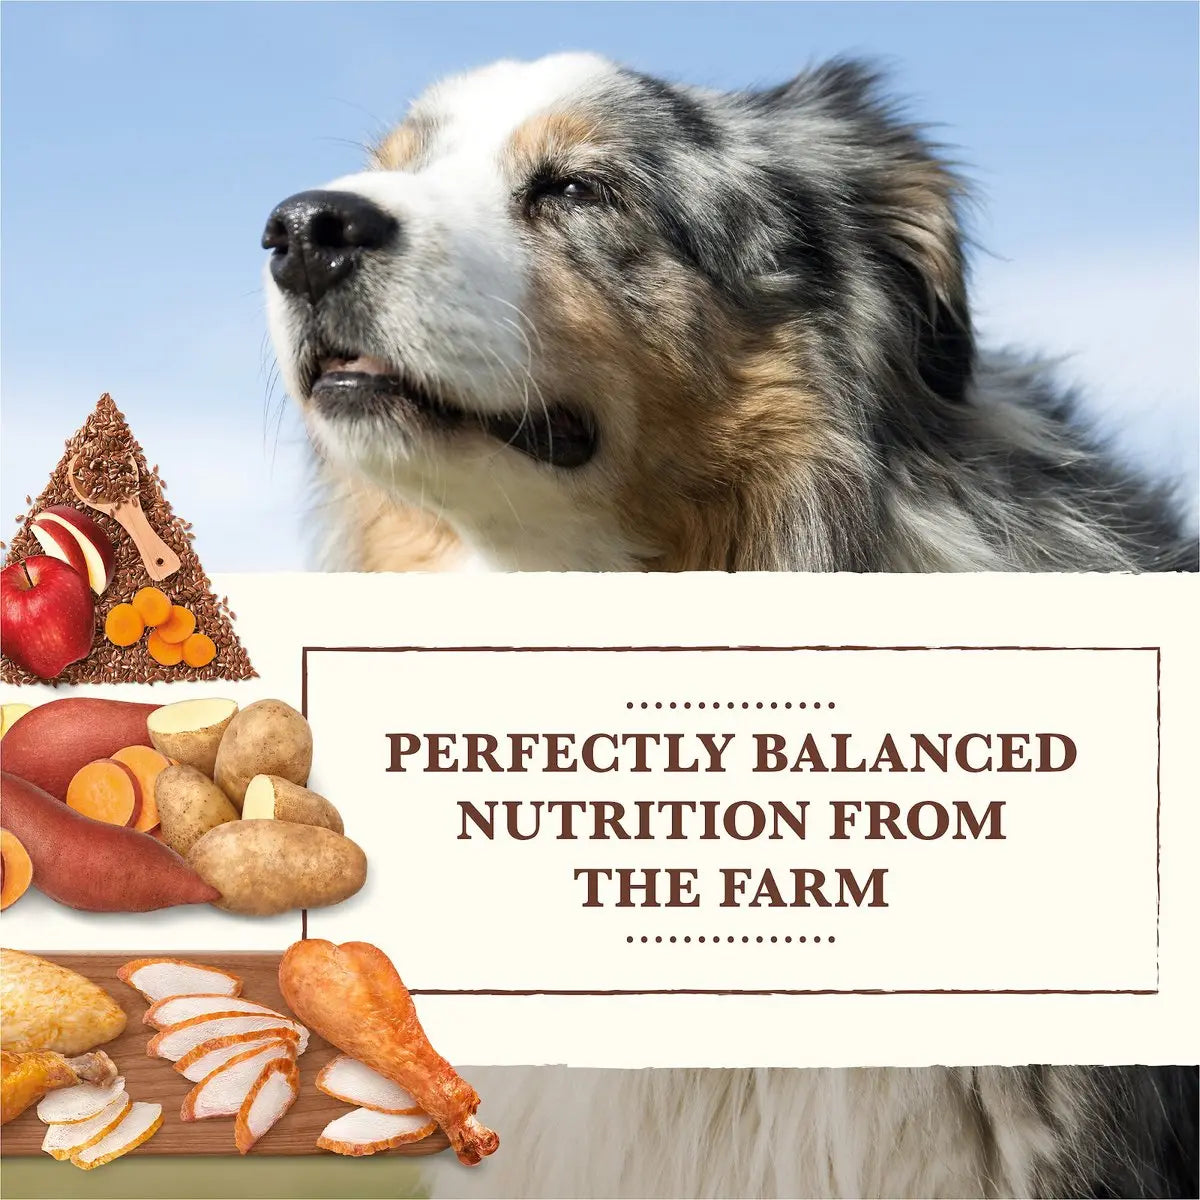 Whole Earth Farms® Goodness from the Earth Grain Free Chicken & Turkey Recipe Dog Food 25 Lbs Whole Earth Farms®